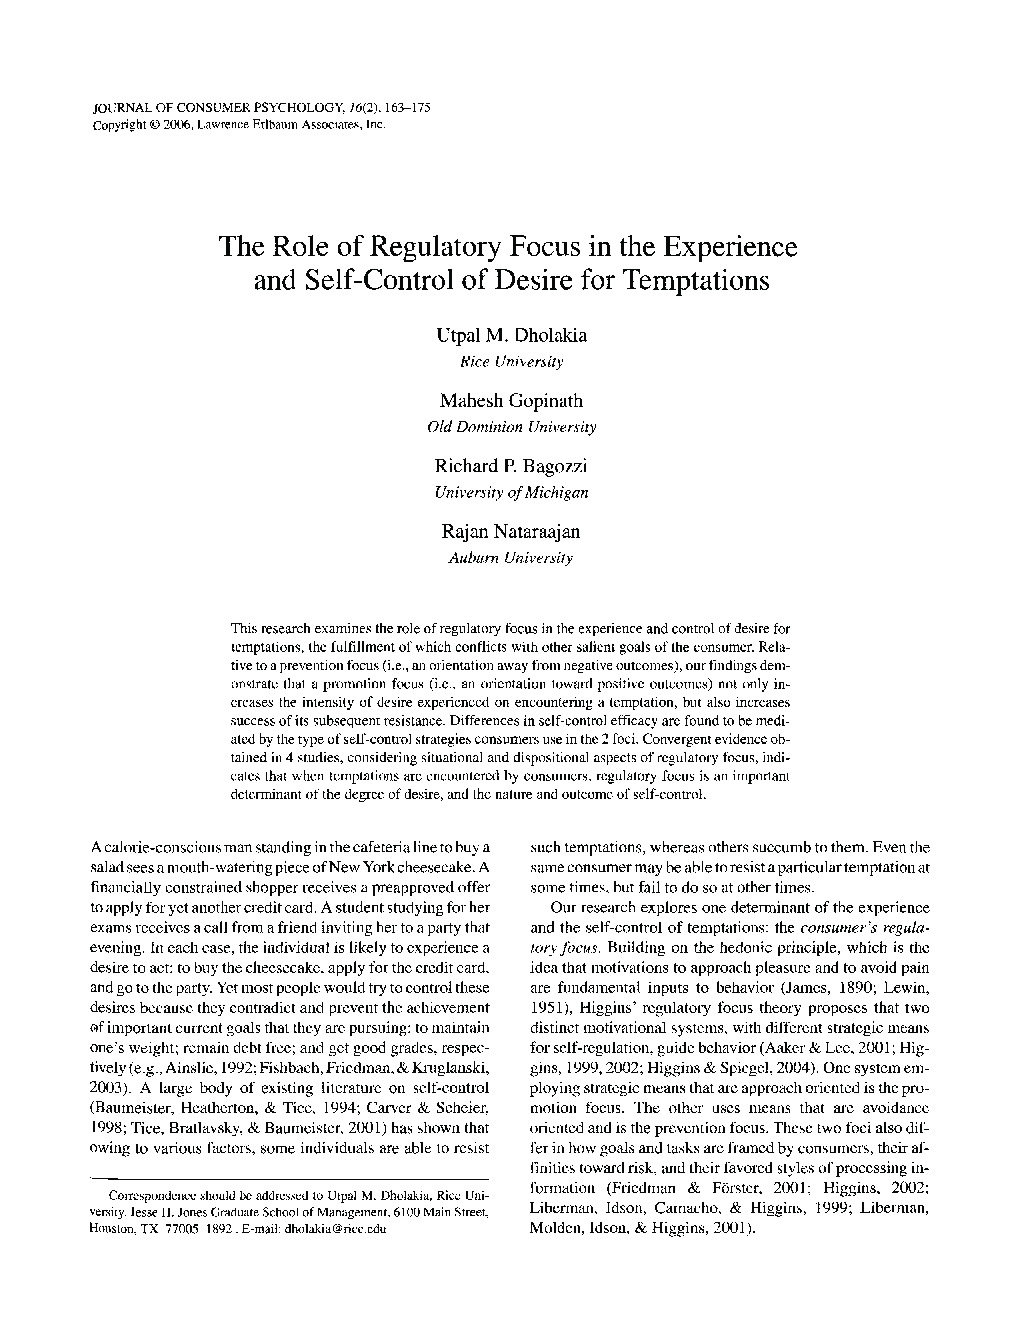 The Role of Regulatory Focus in the Experience and Self-Control of Desire for Temptations